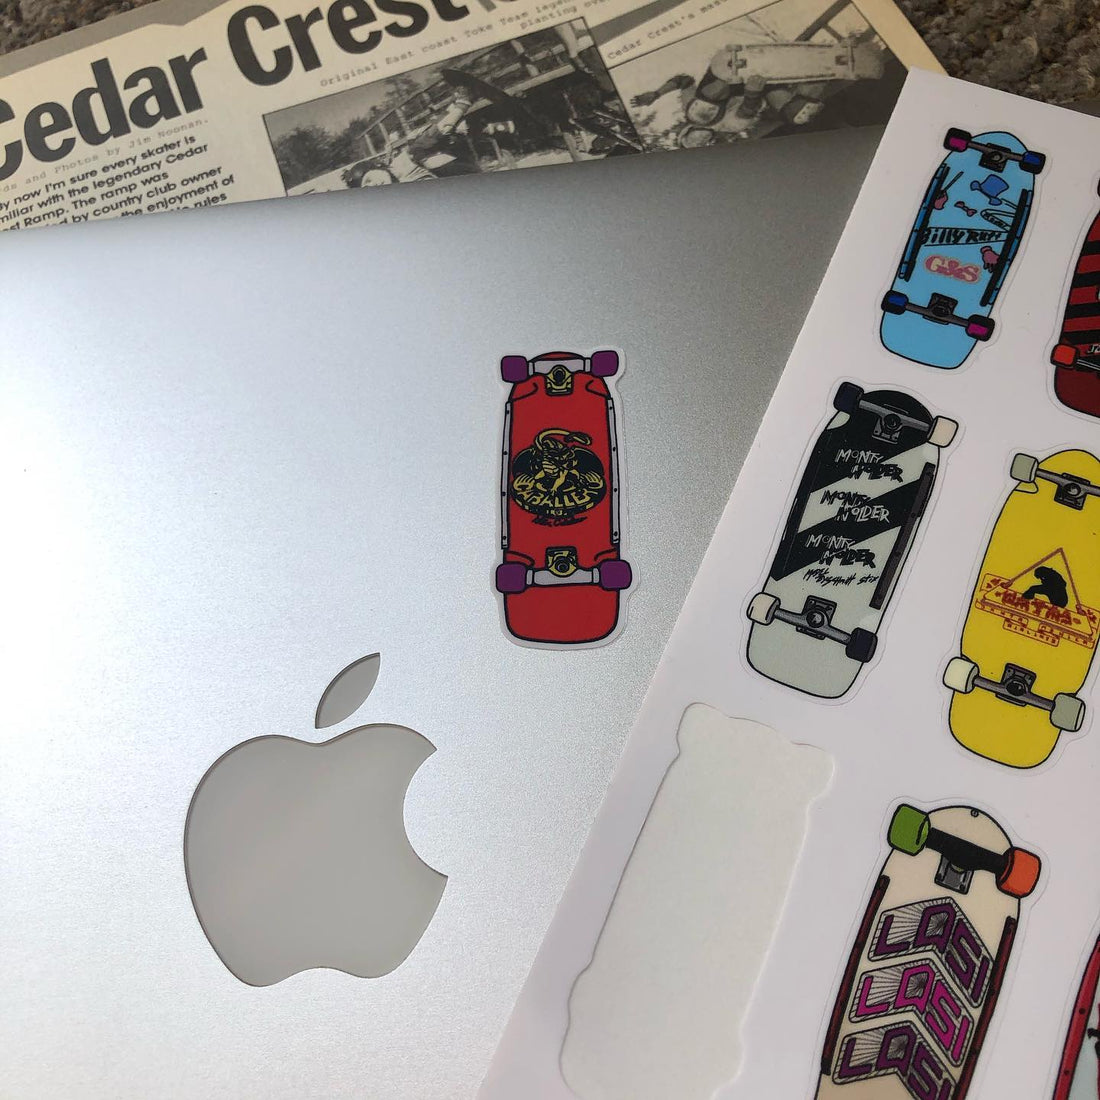 Coming Soon!
Mid-80s Skateboards Sticker Sheets!...